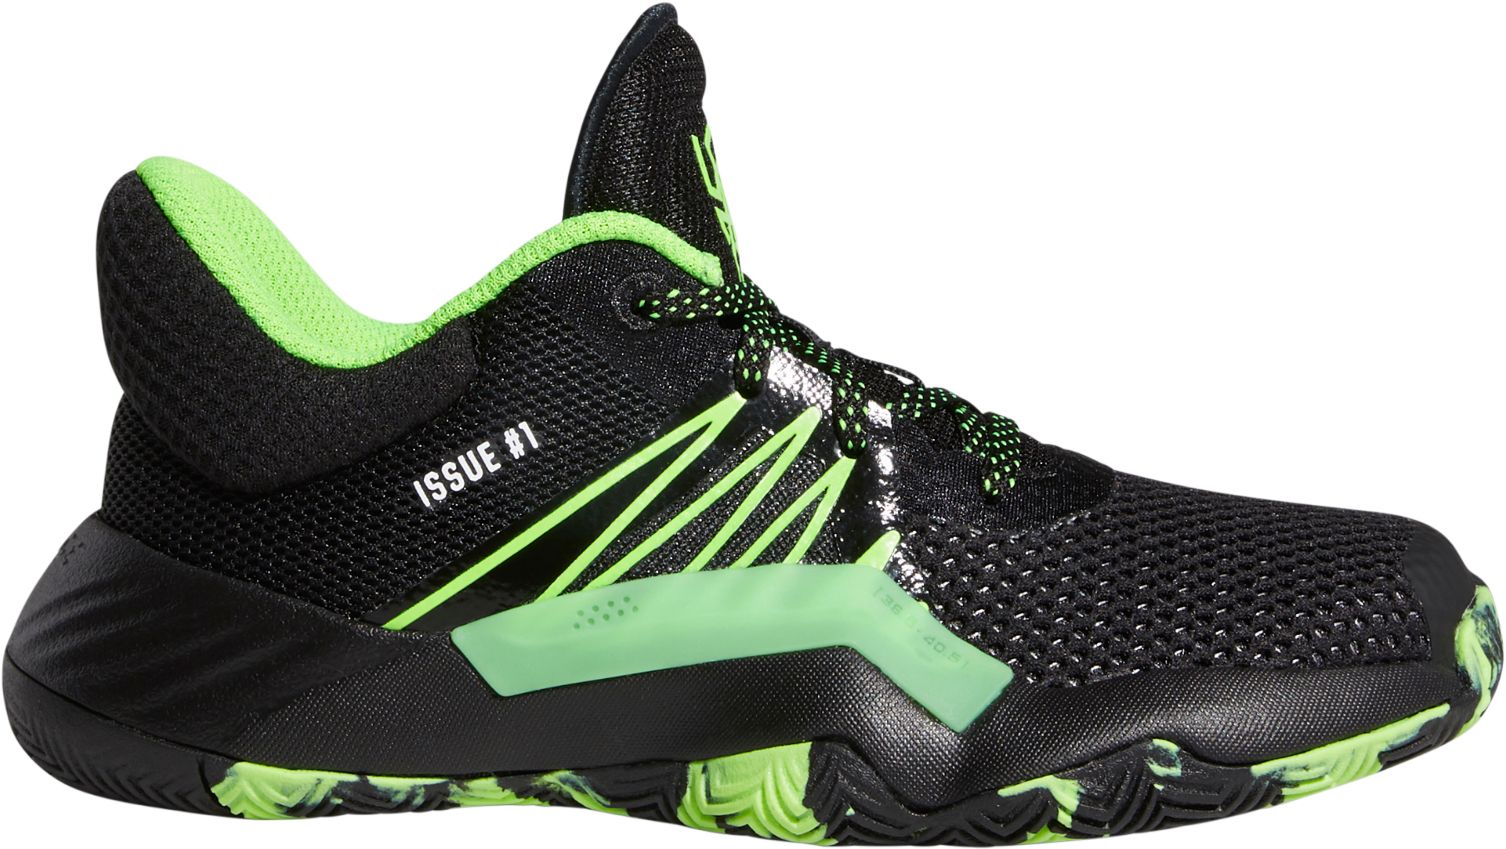 adidas crazylight boost 2015 for sale